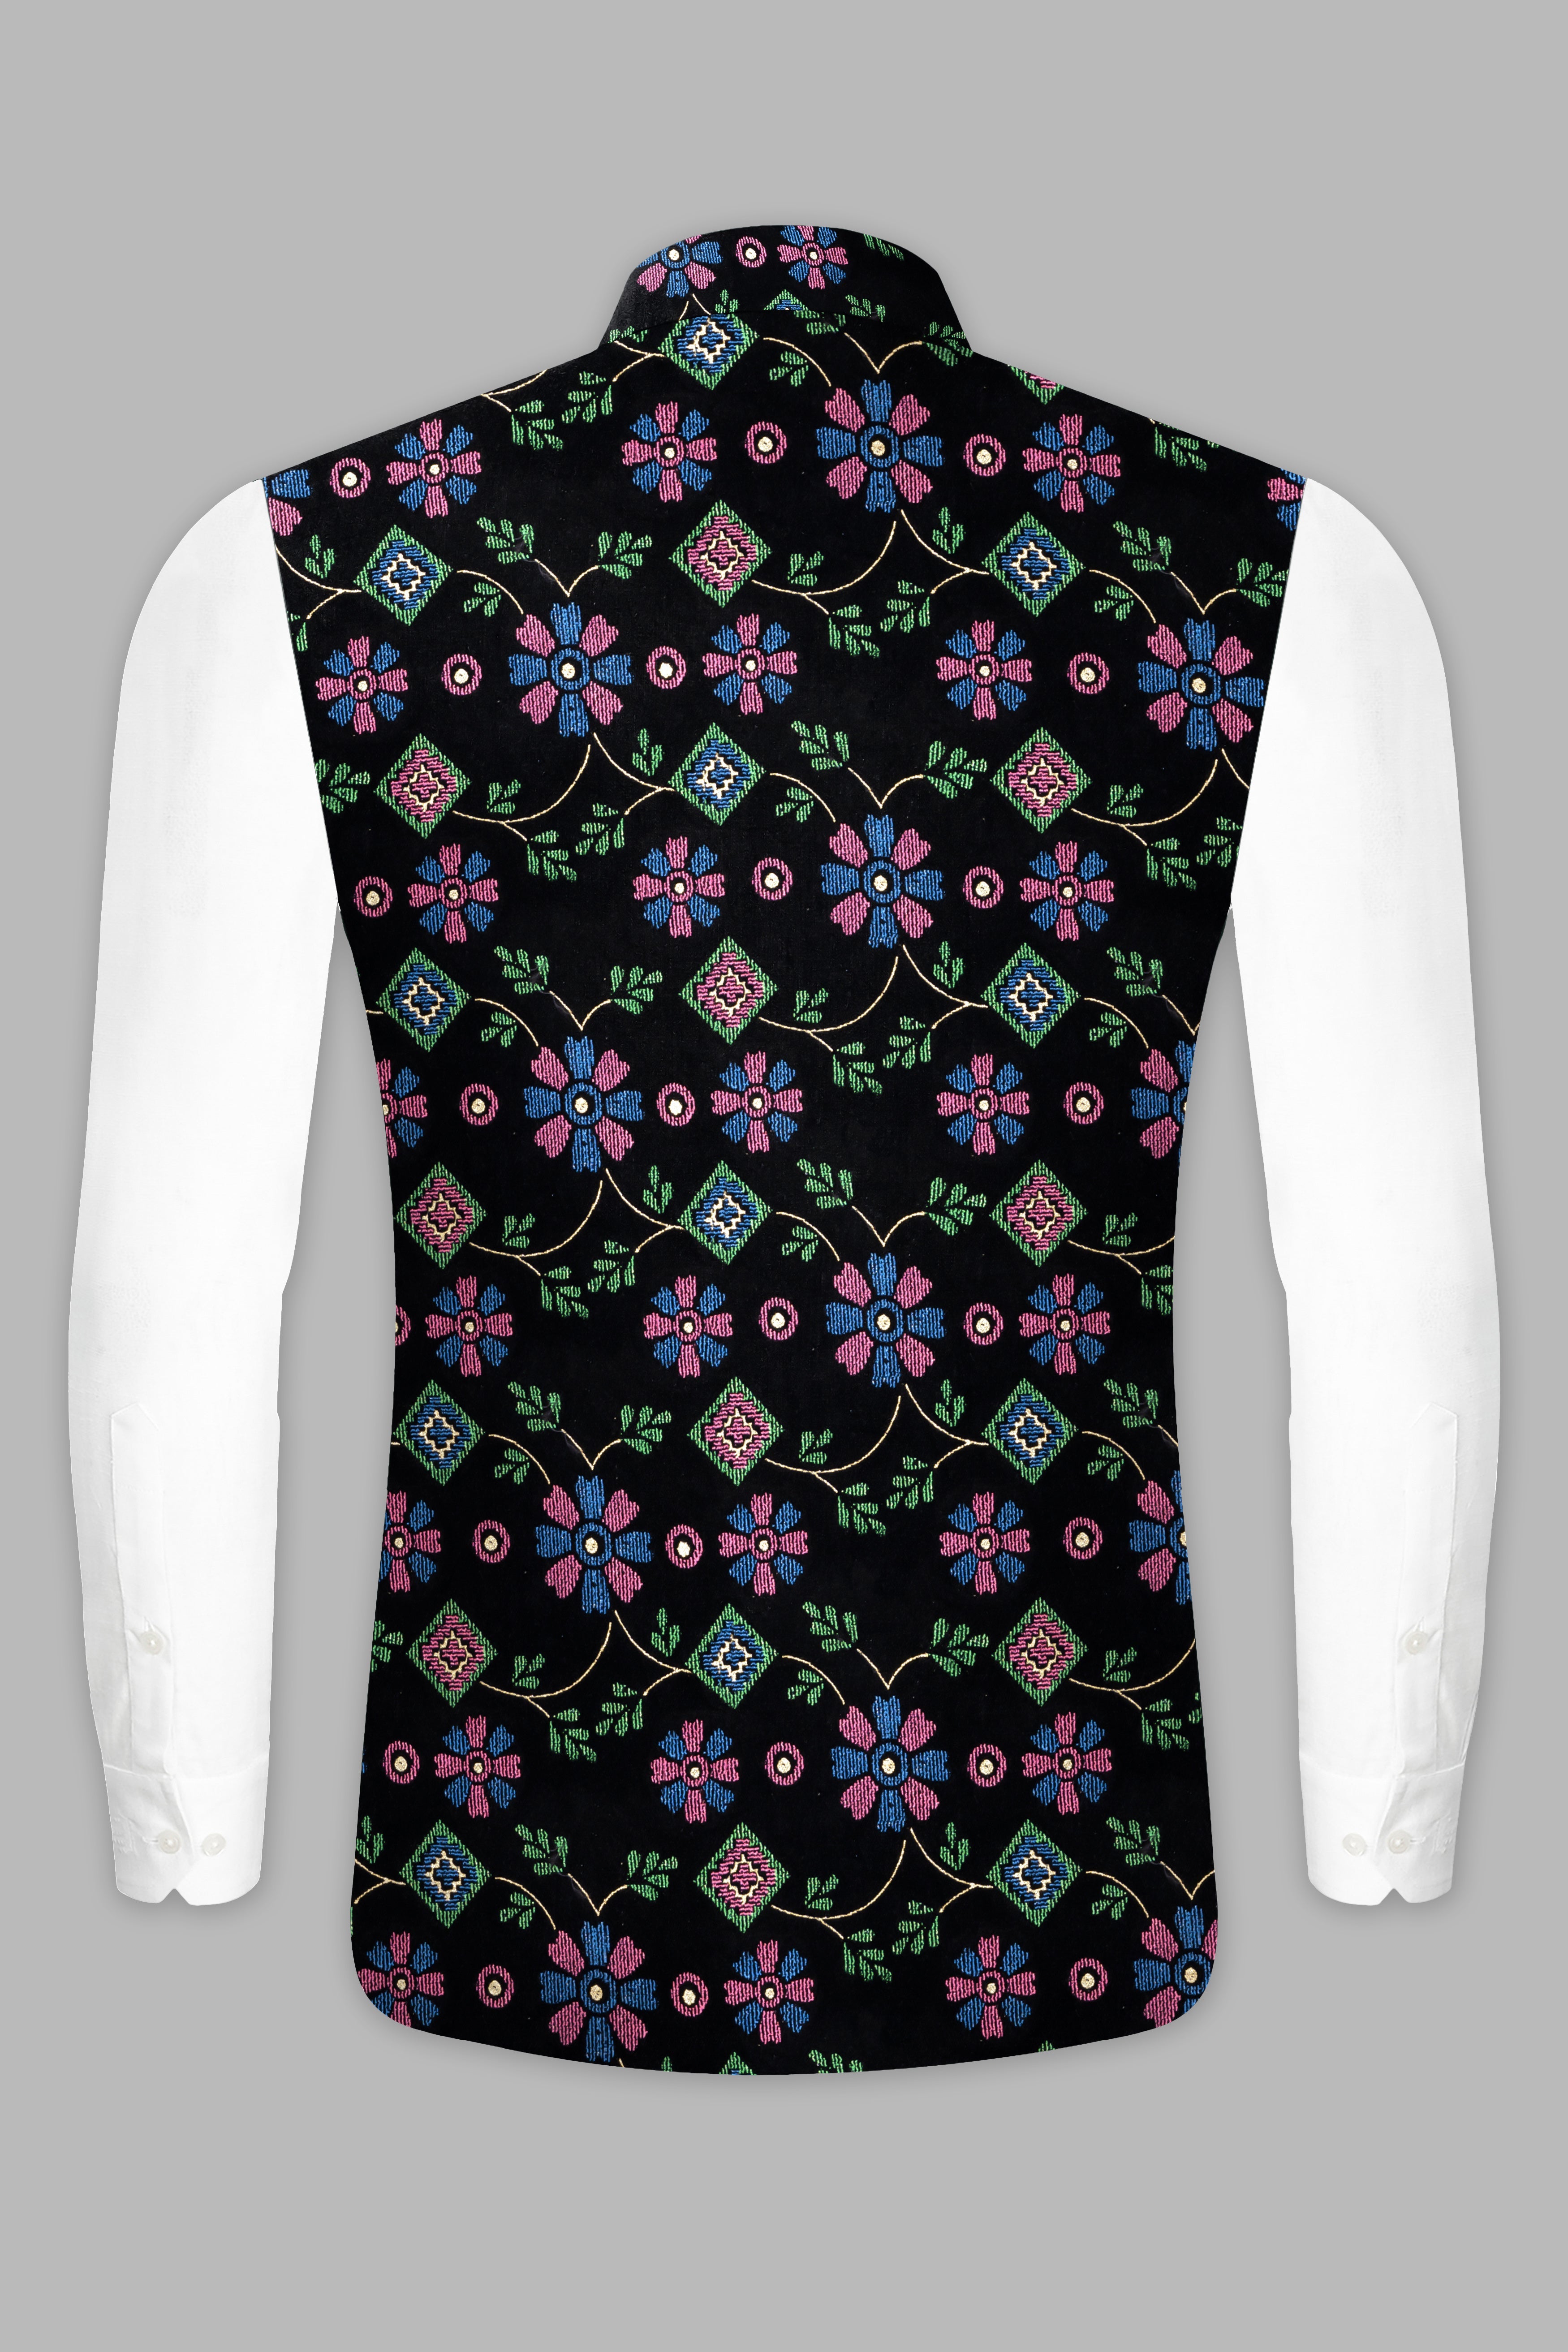 Jade Black and Glade Green Multicolour Floral Jacquard Weave Nehru Jacket WC3532-36,  WC3532-38,  WC3532-40,  WC3532-42,  WC3532-44,  WC3532-46,  WC3532-48,  WC3532-50,  WC3532-52,  WC3532-54,  WC3532-56,  WC3532-58,  WC3532-60